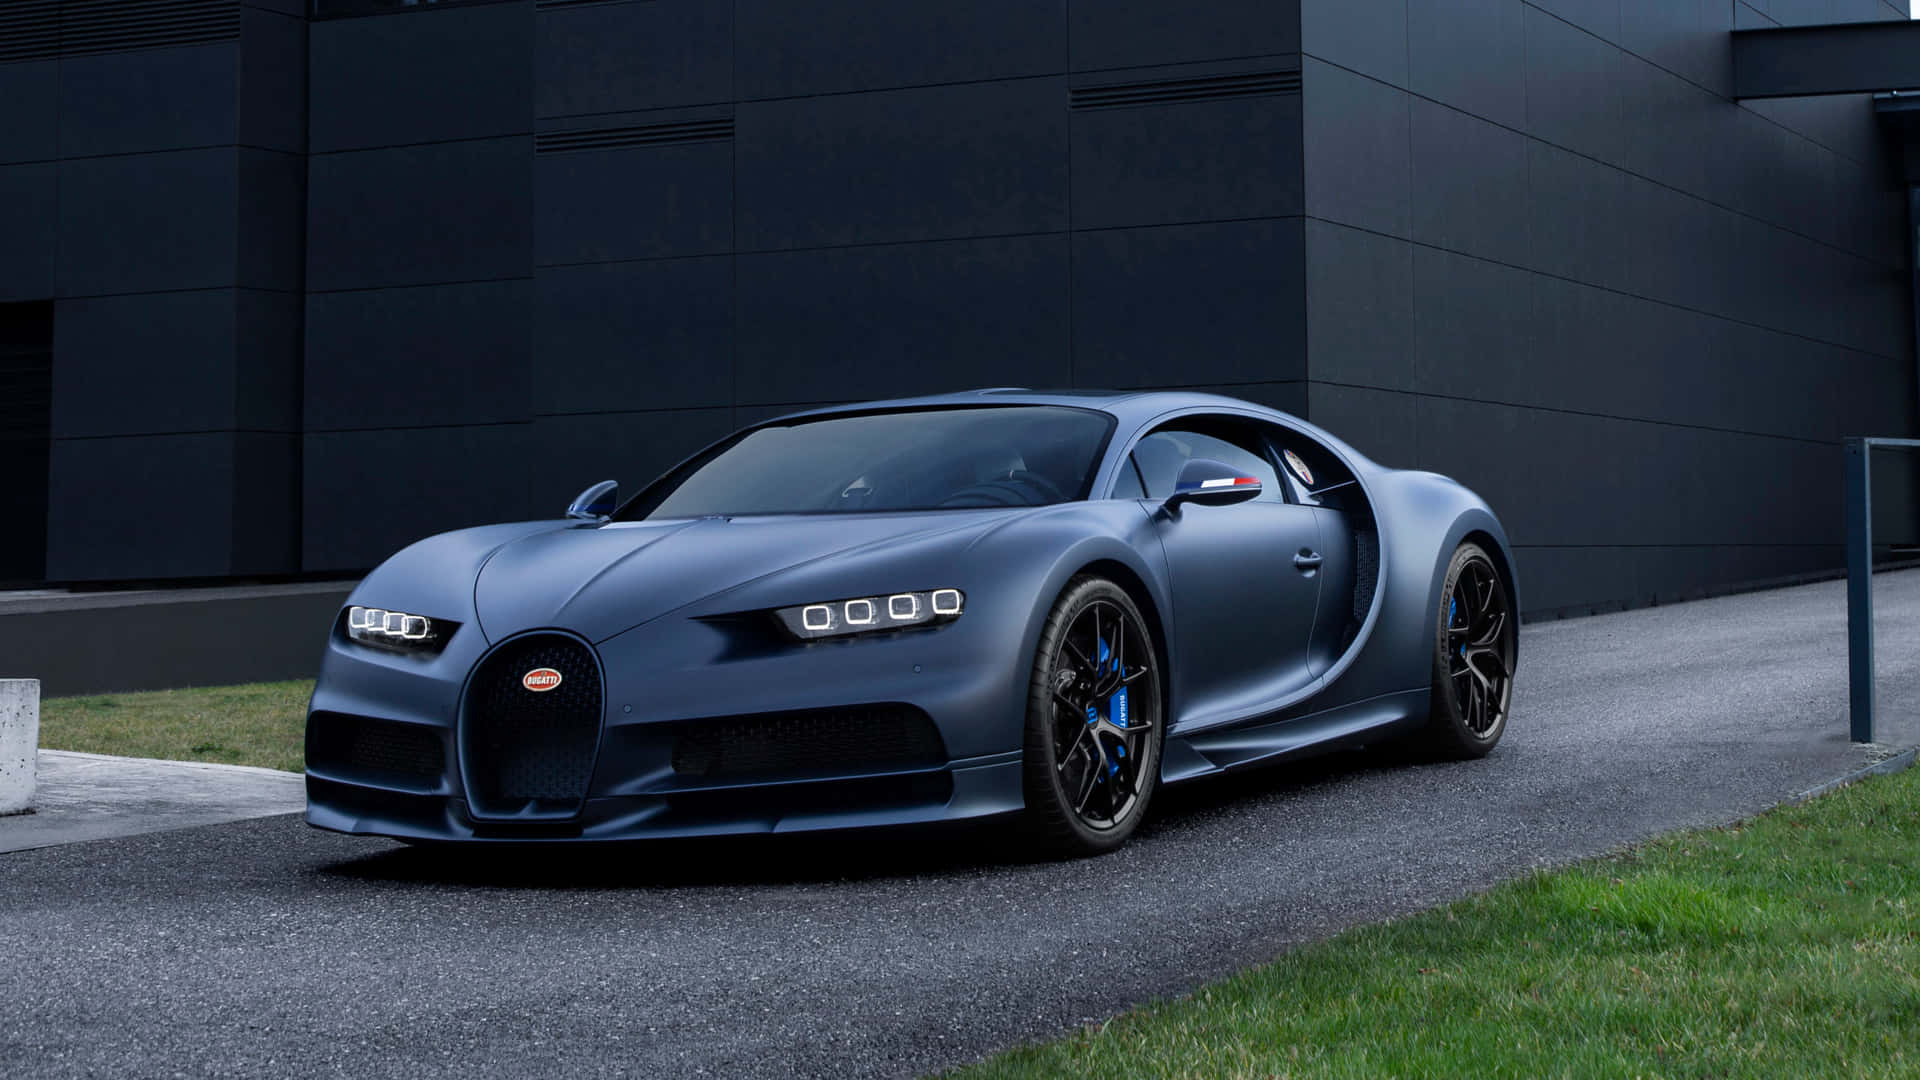 Take your ride to the next level with the legendary Best Bugatti. Wallpaper